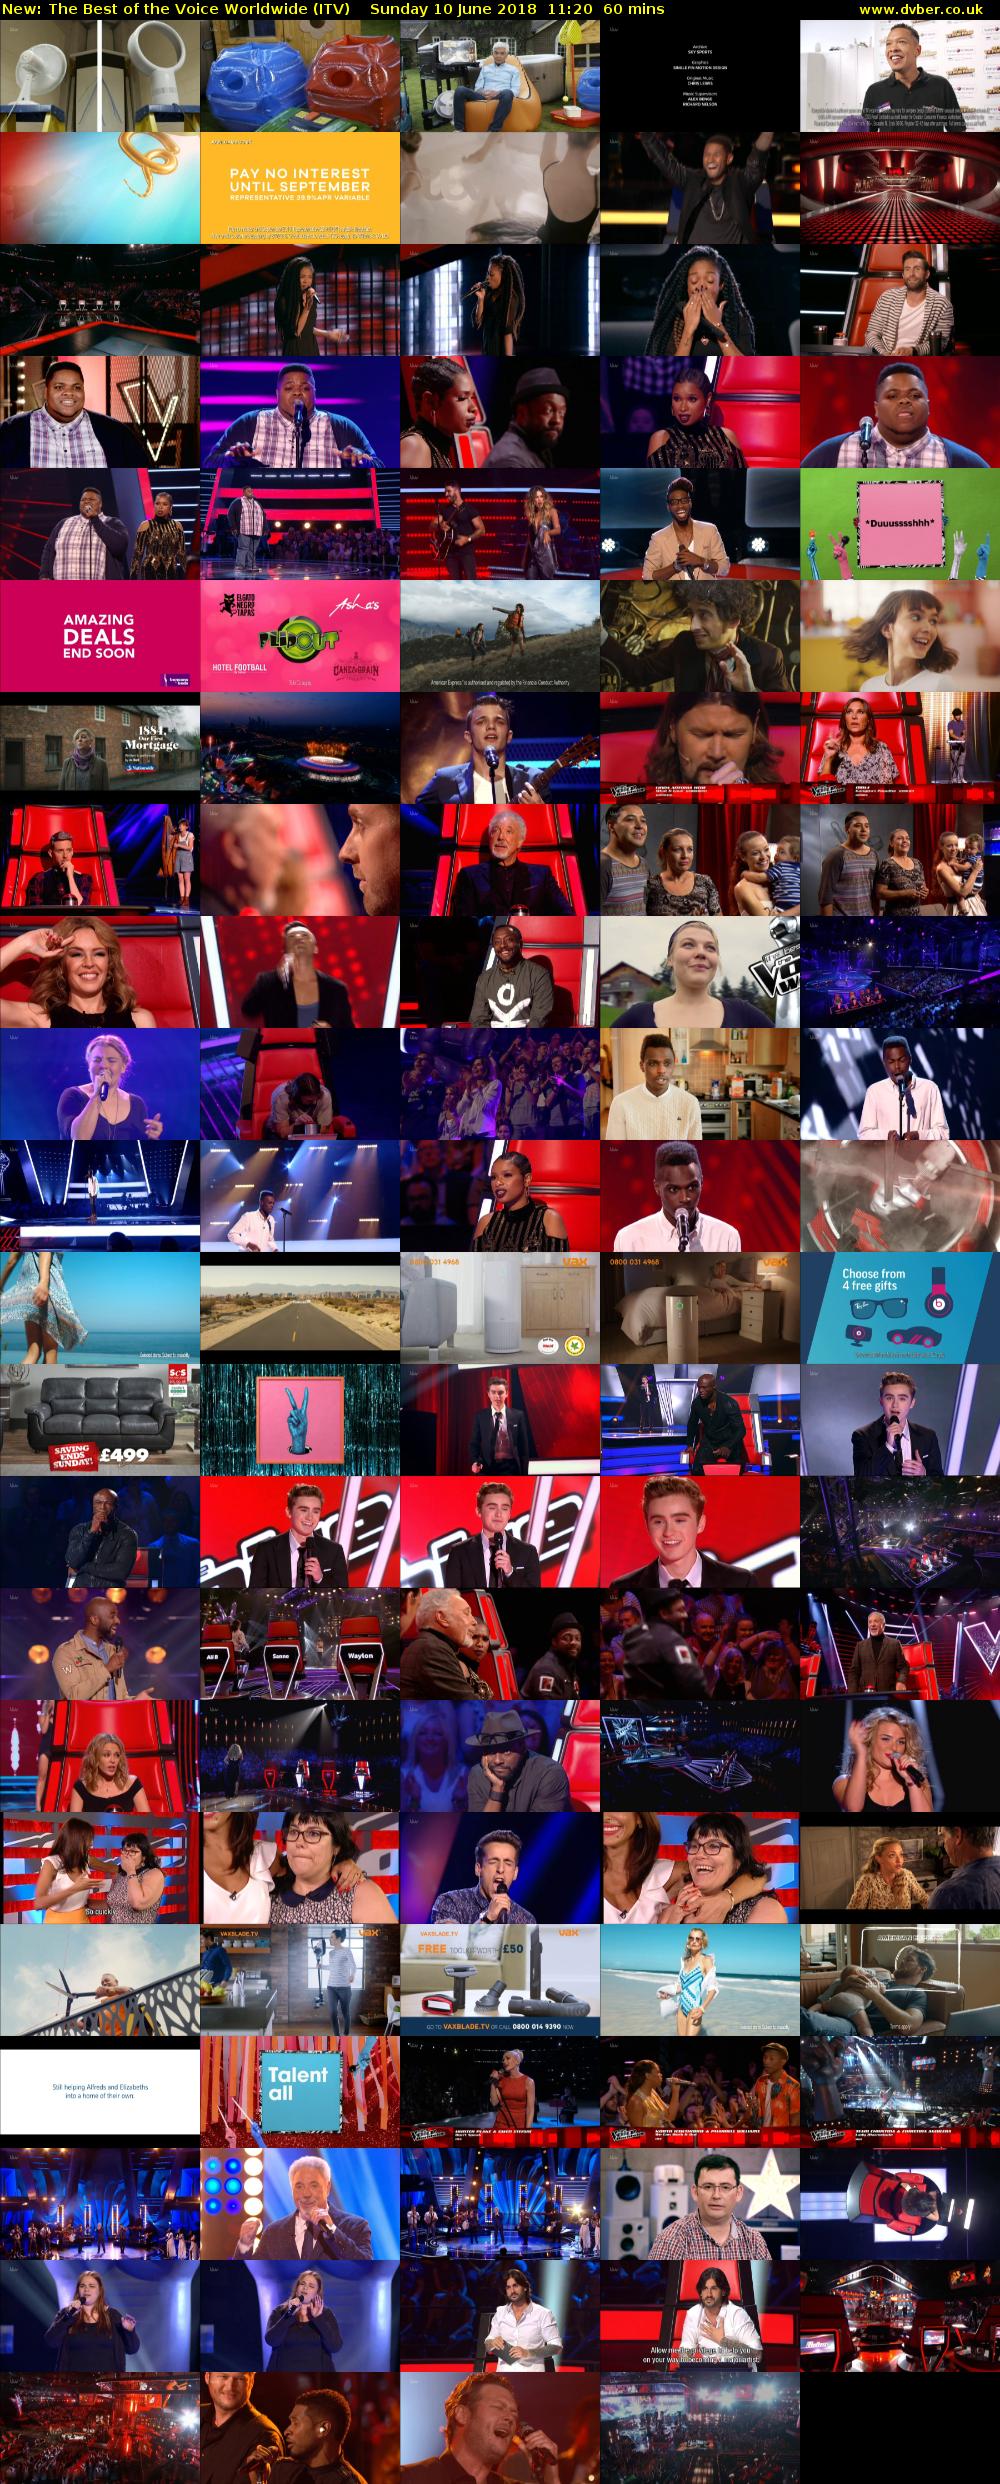 The Best of the Voice Worldwide (ITV) Sunday 10 June 2018 11:20 - 12:20